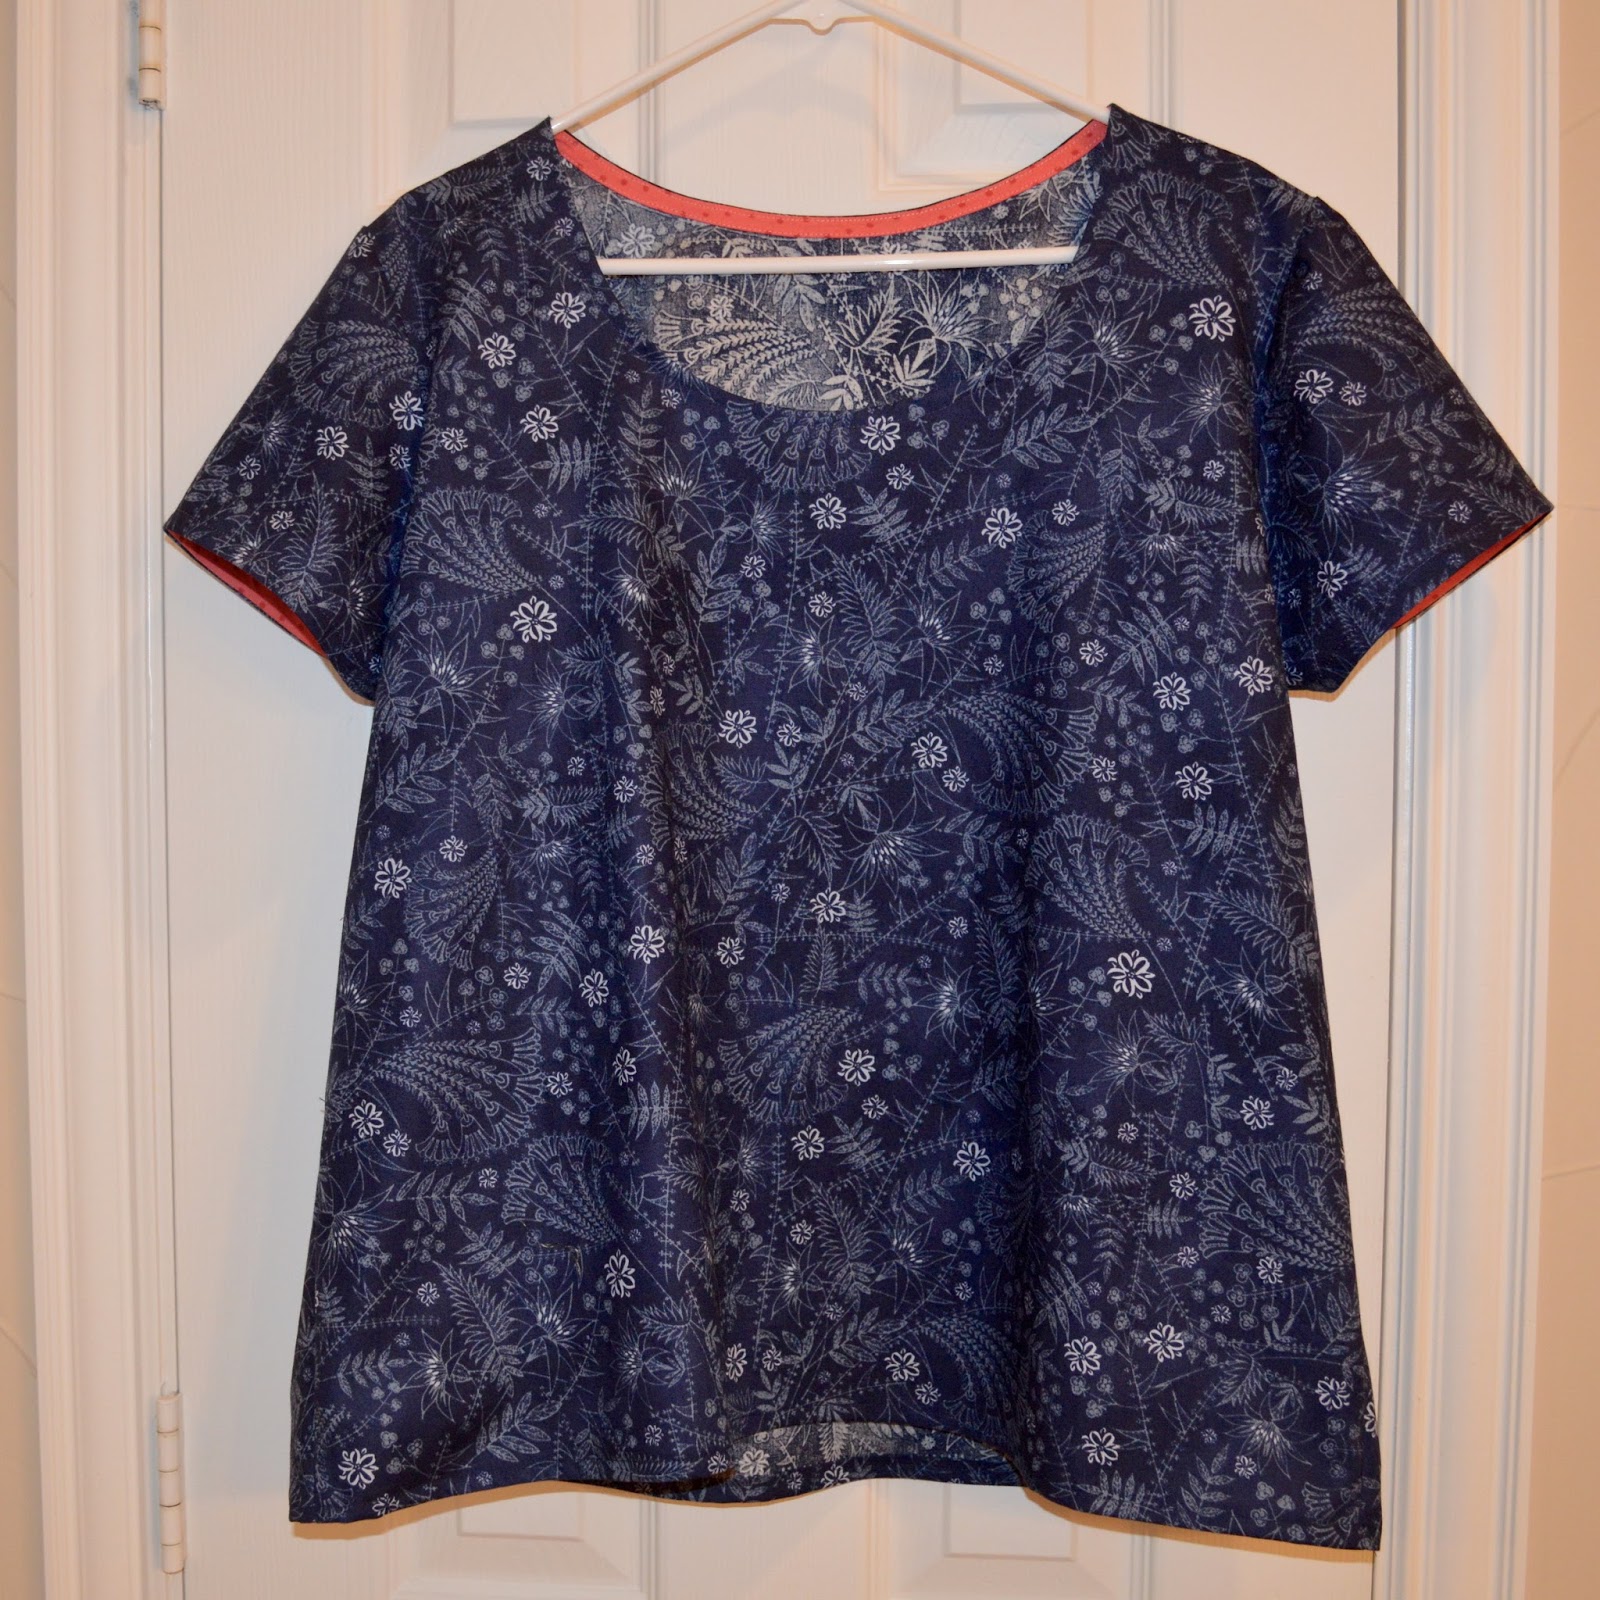 ellyn's place: Scout tee